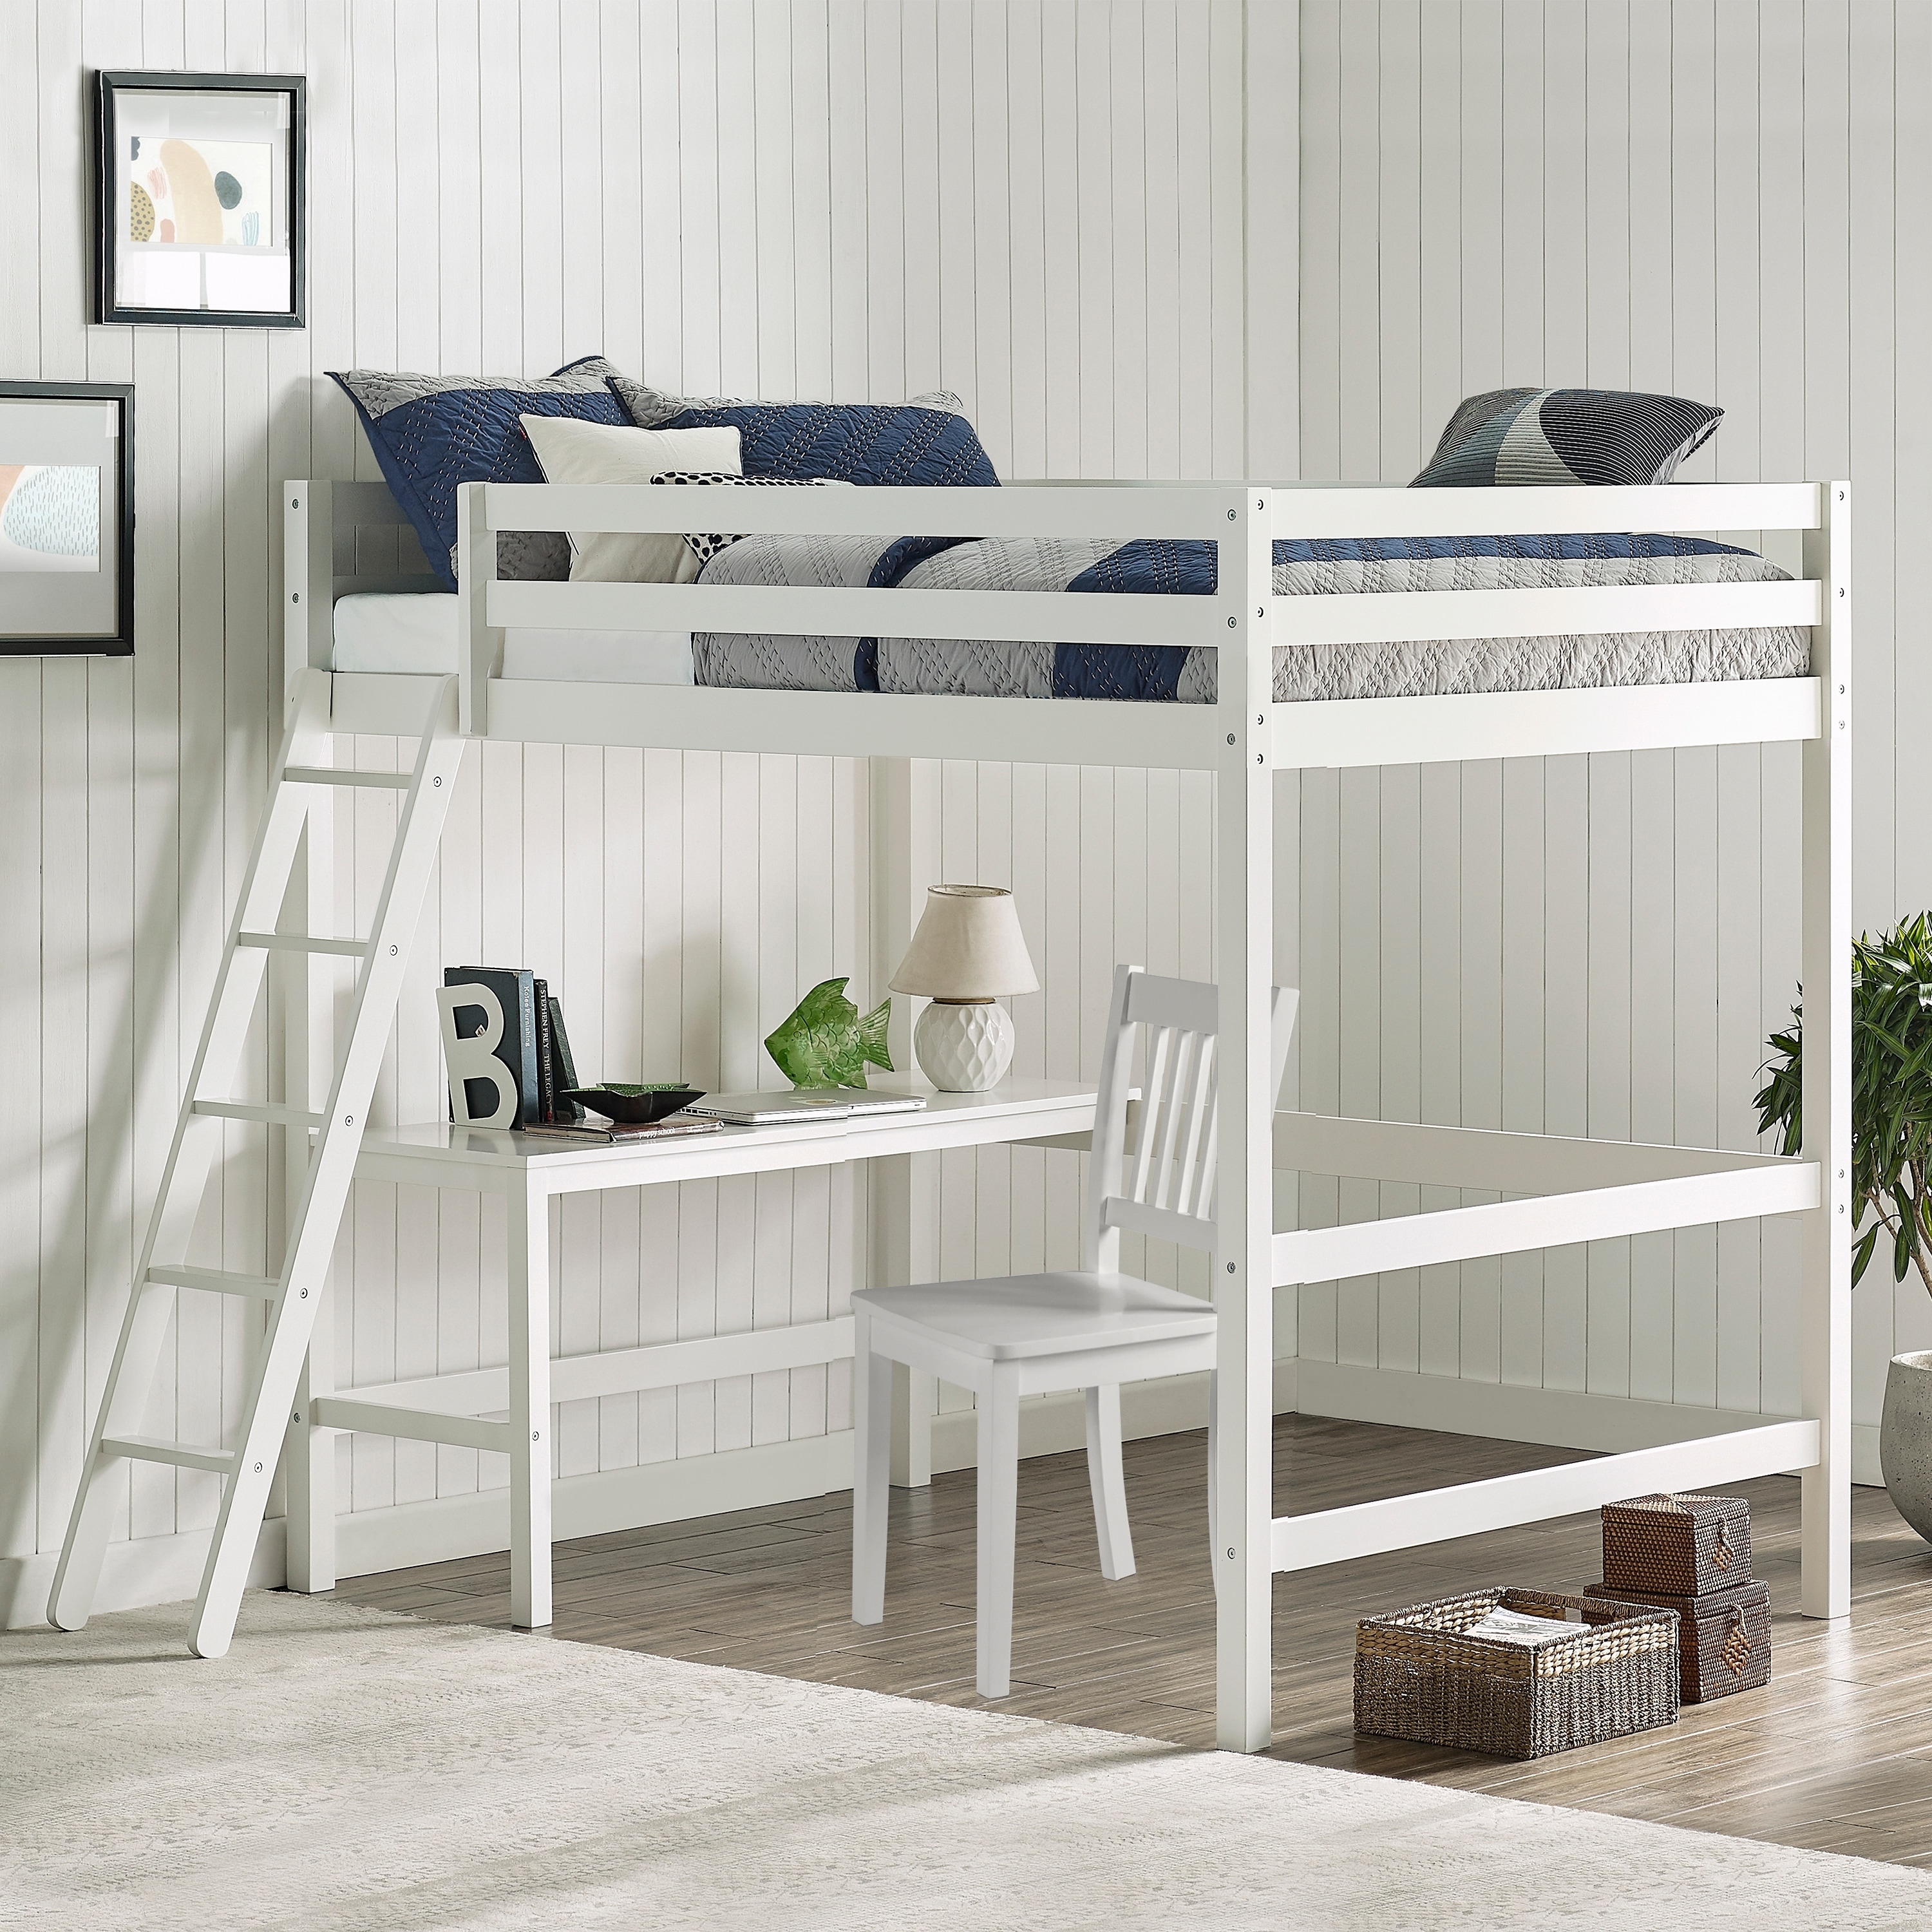 bunk bed with chair